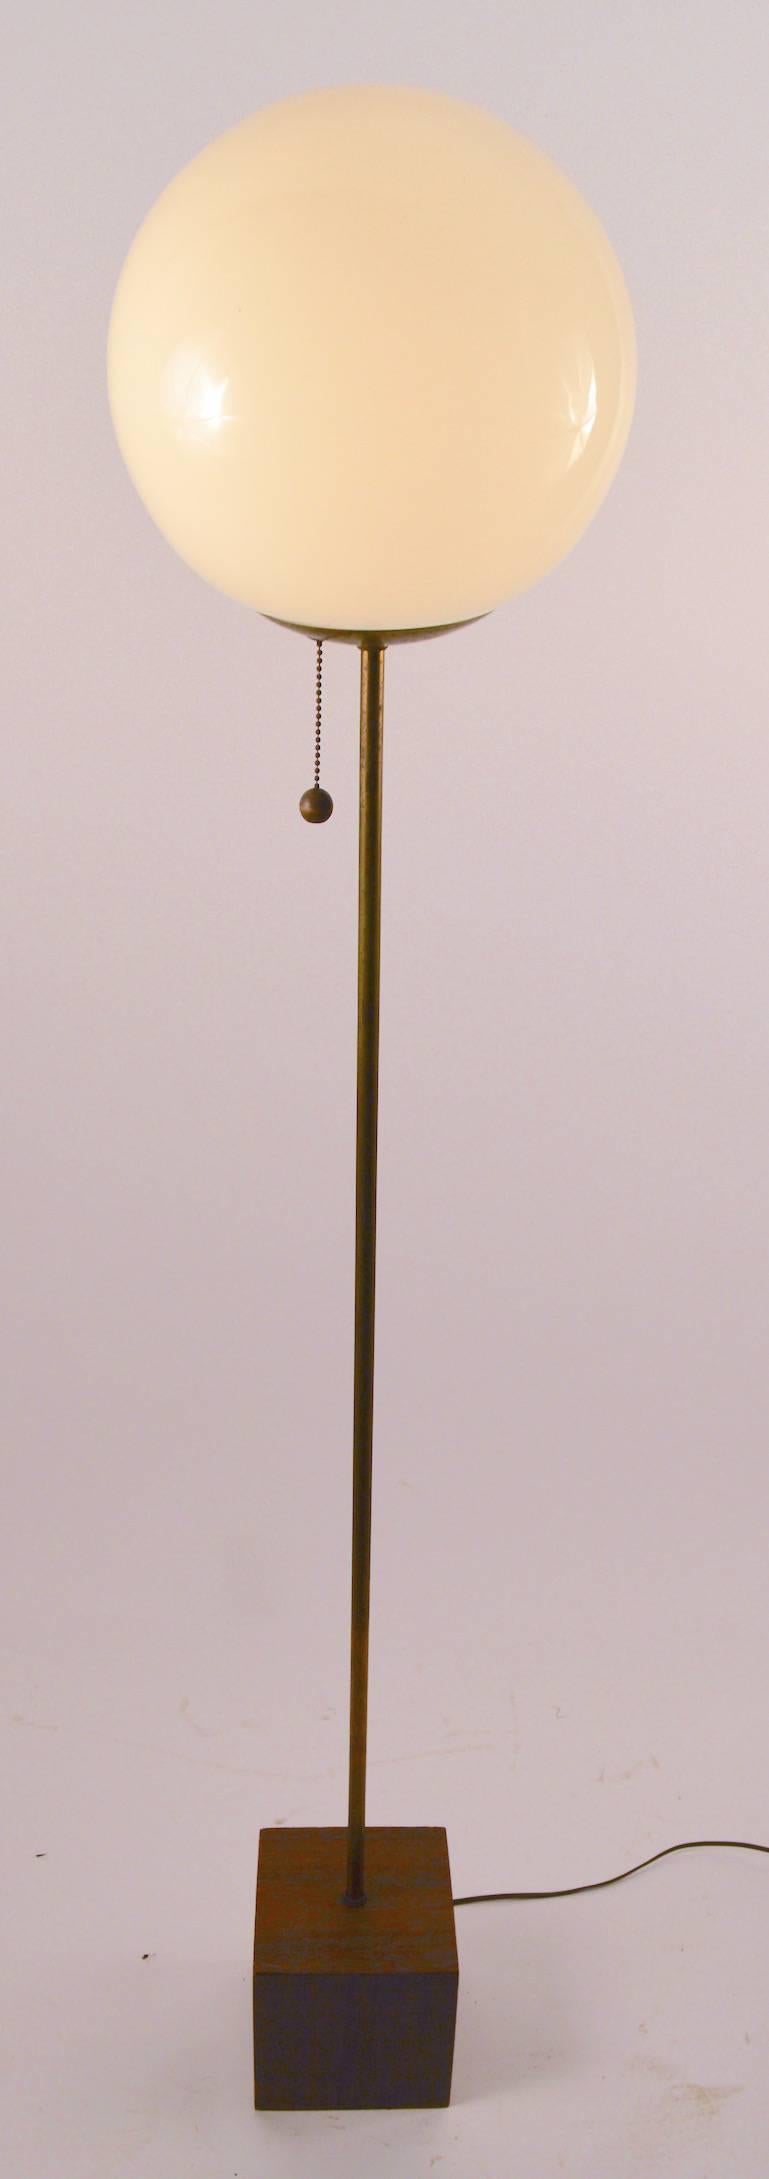 Mid-Century Modern Glass Ball Top Floor Lamp Attributed to Laurel Lamp Co.